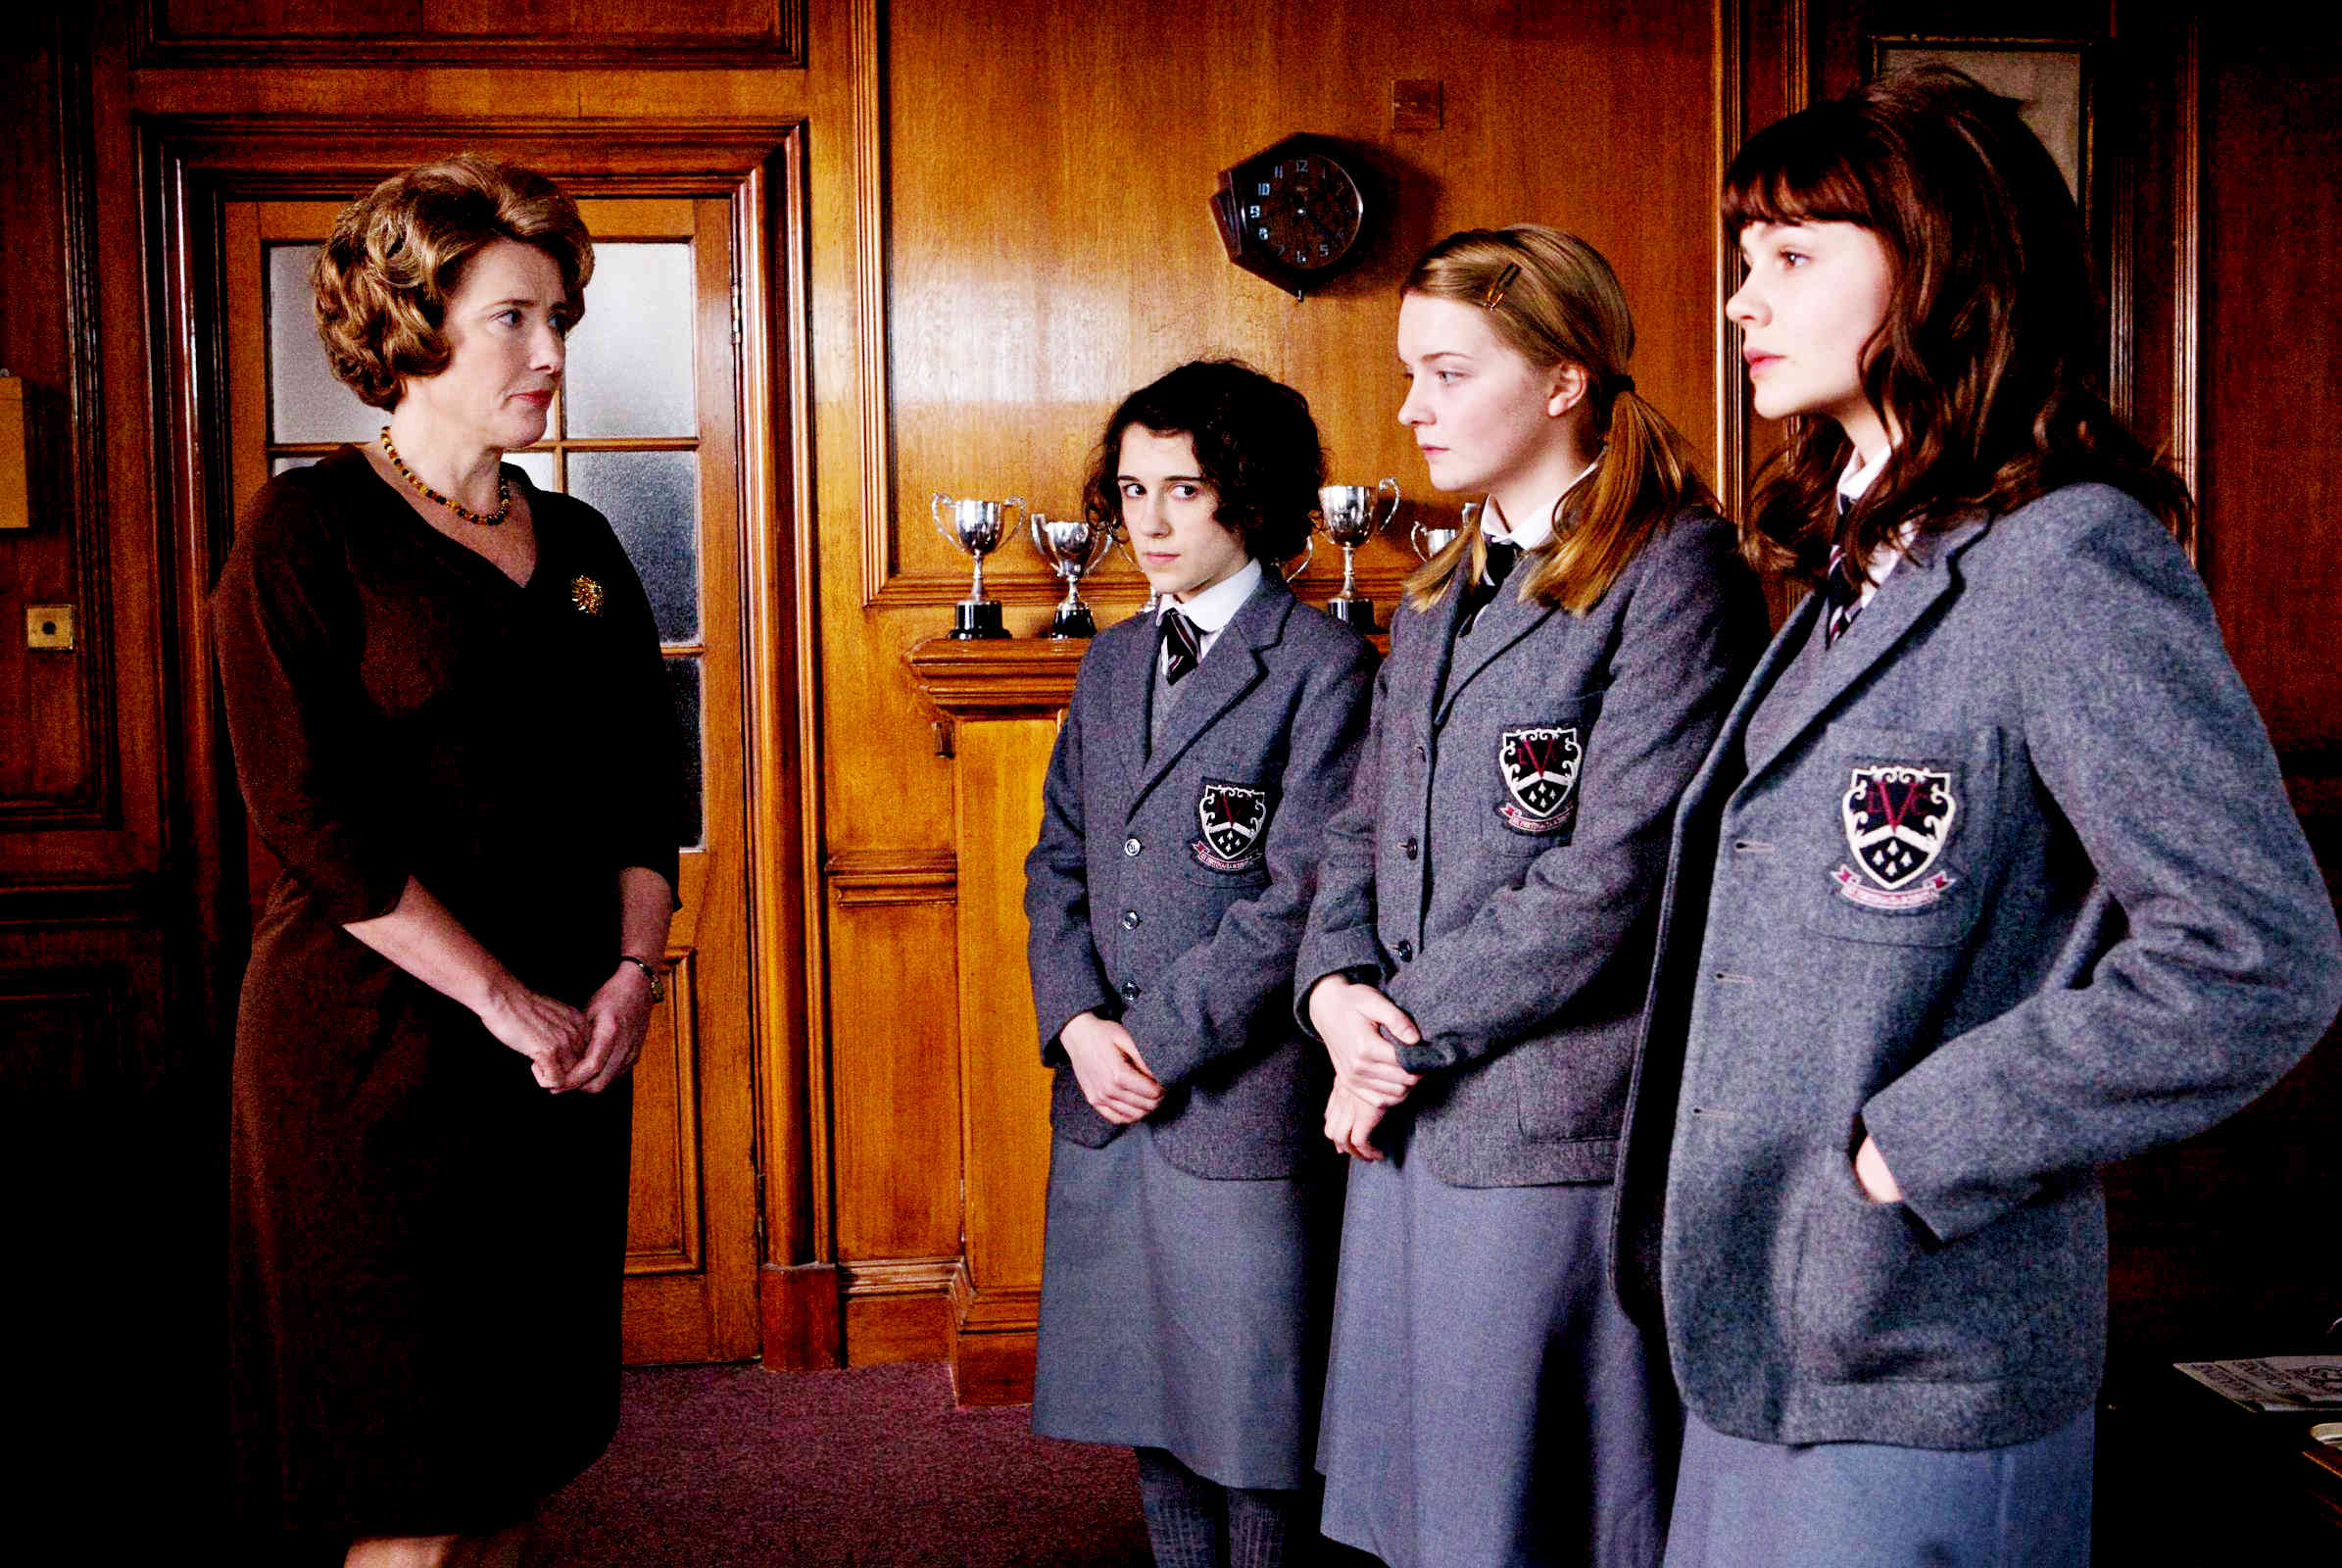 Emma Thompson, Ellie Kendrick, Amanda Fairbank-Hynes and Carey Mulligan in Sony Pictures Classics' An Education (2009). Photo credit by Kerry Brown.